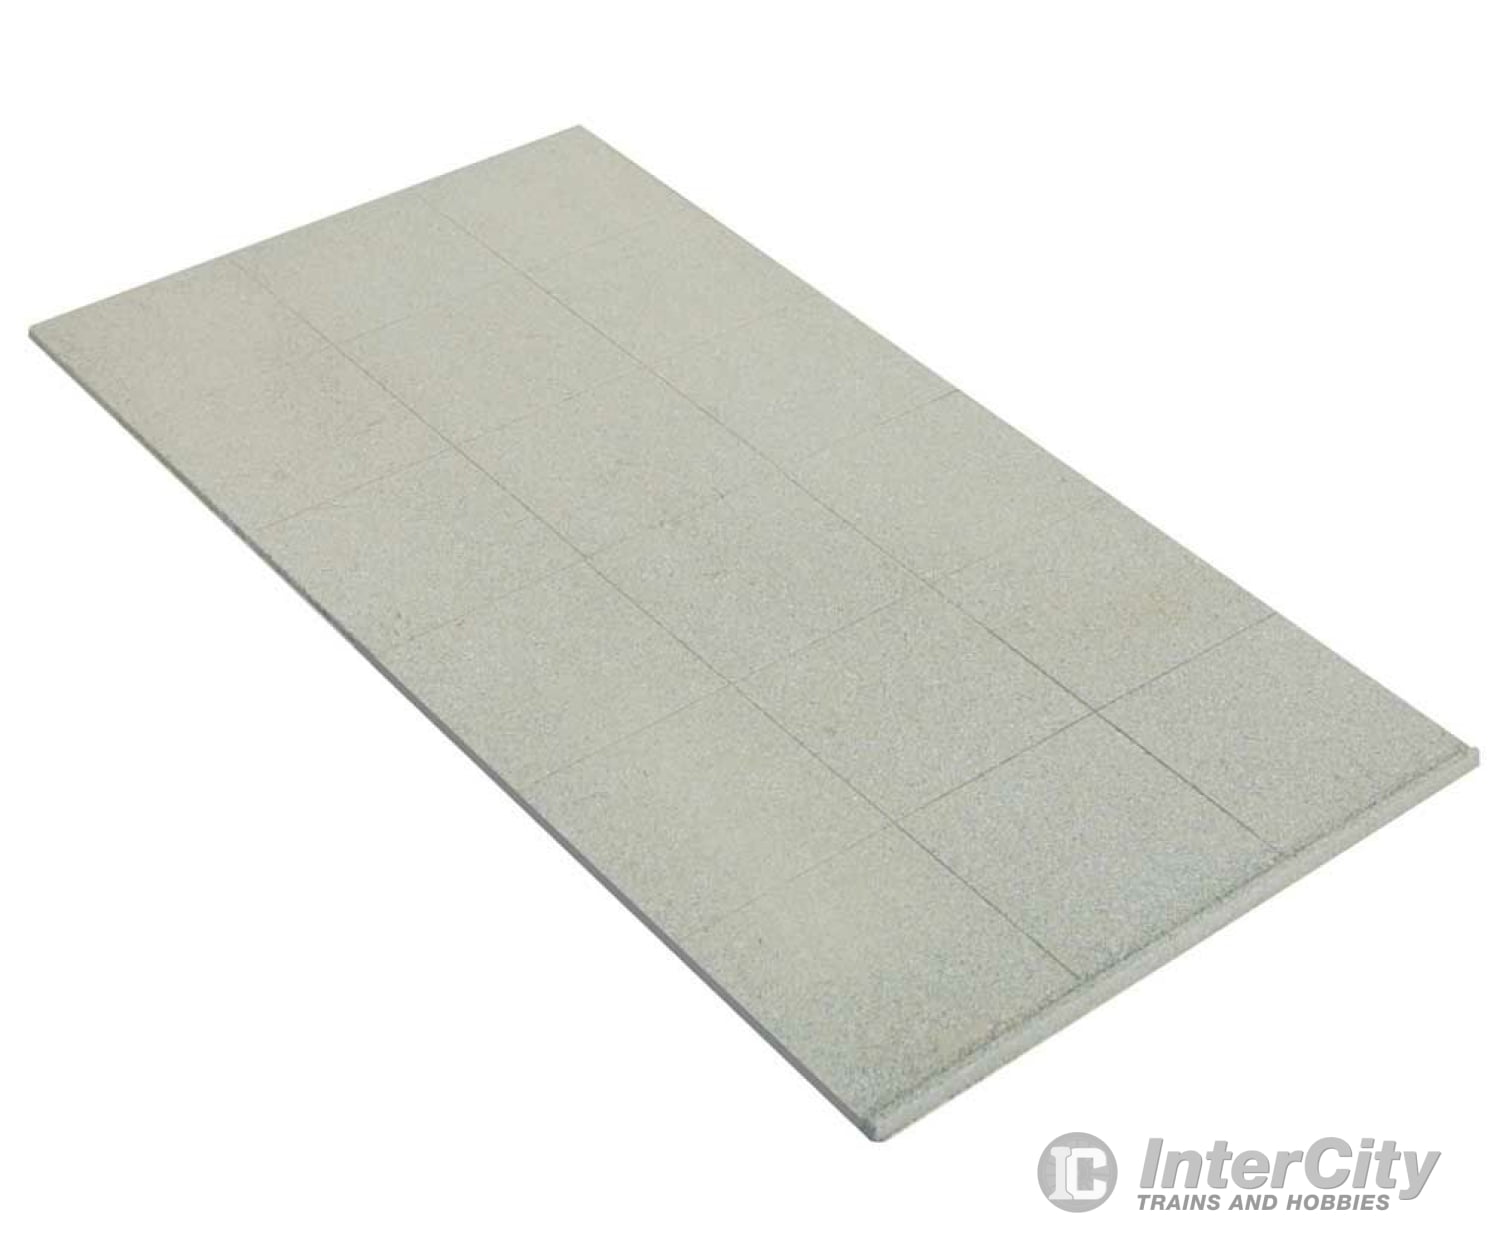 Walthers Cornerstone 3886 Modern Parking Lot - 8 Sections - - Kit Each Section: 5 - 3/4 X 2 -